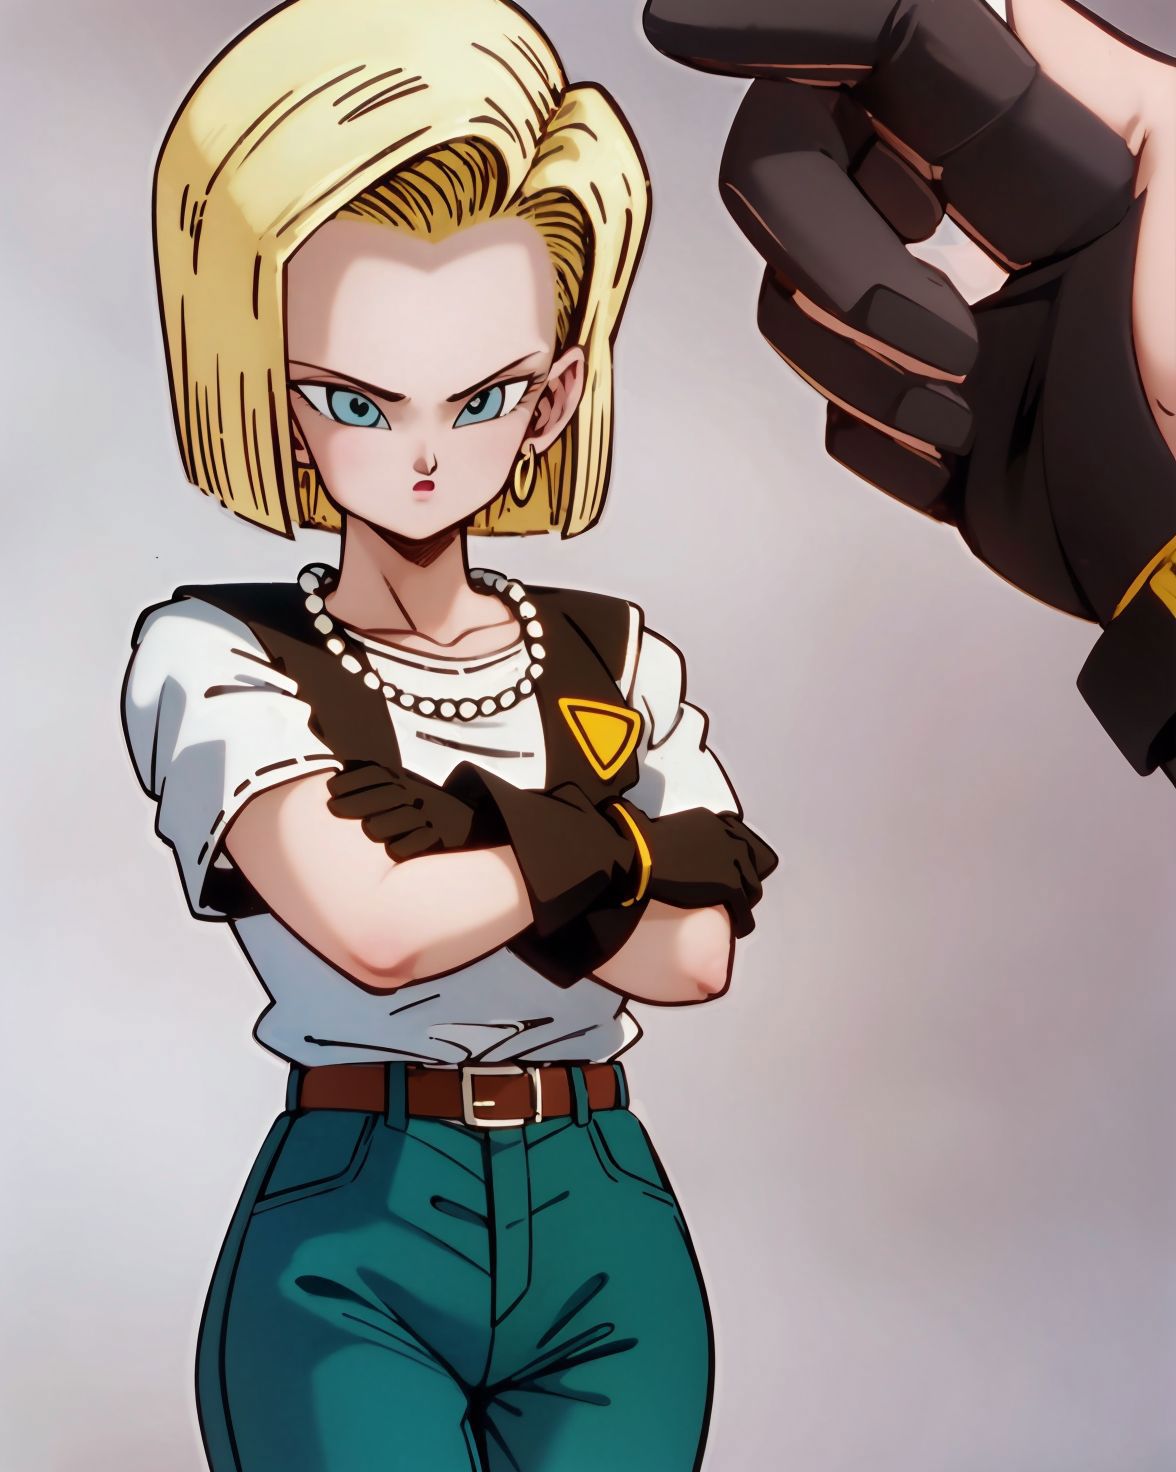 Android 18 - DBZ image by bla